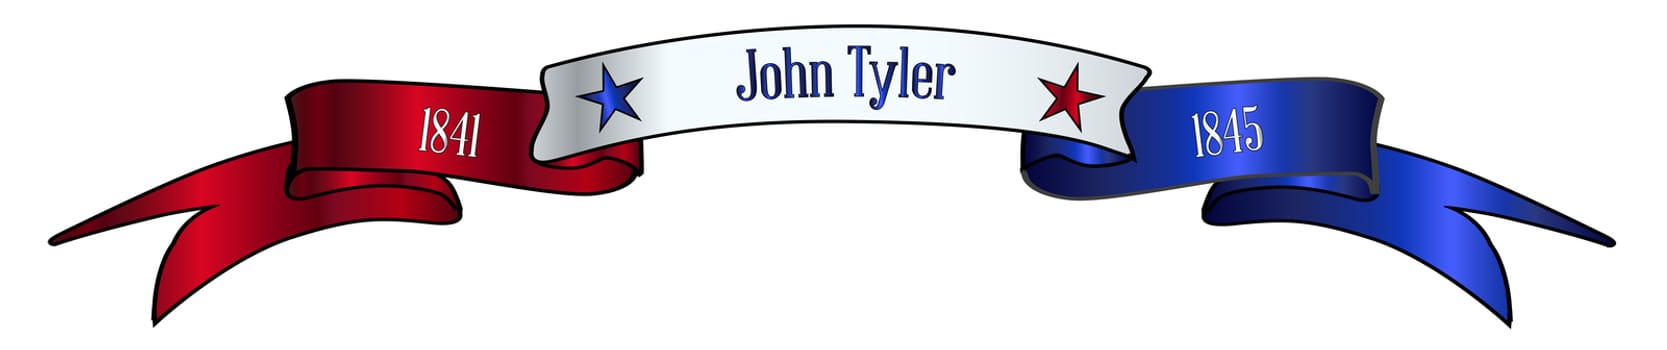 A red white and blue satin or silk ribbon banner with the text John Tyler and stars and date in office